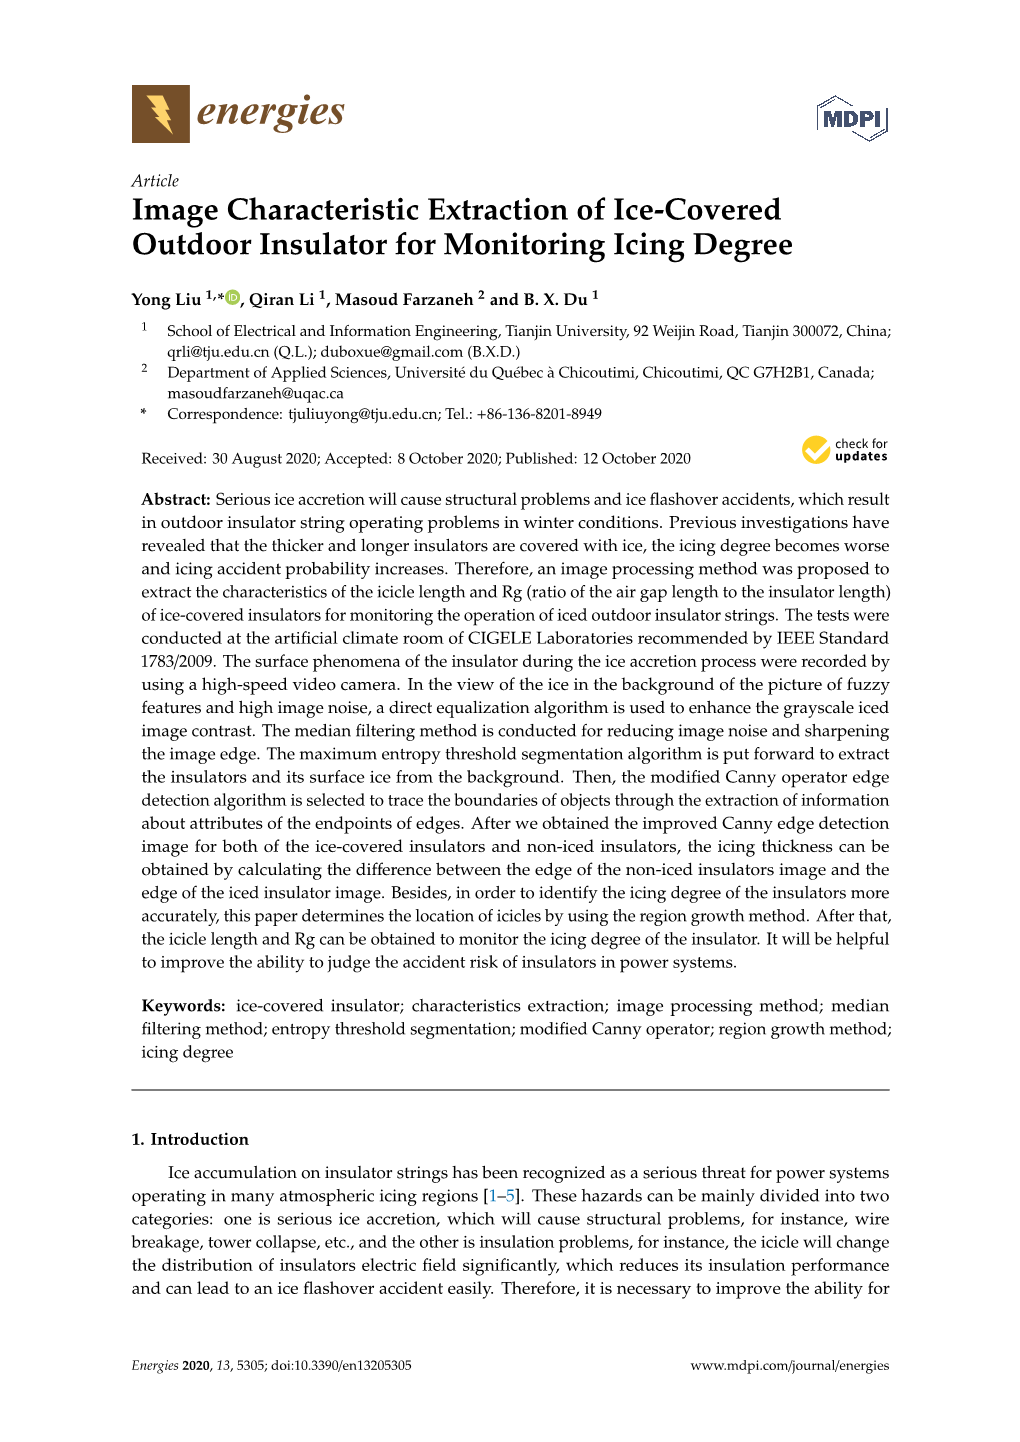 Image Characteristic Extraction of Ice-Covered Outdoor Insulator for Monitoring Icing Degree